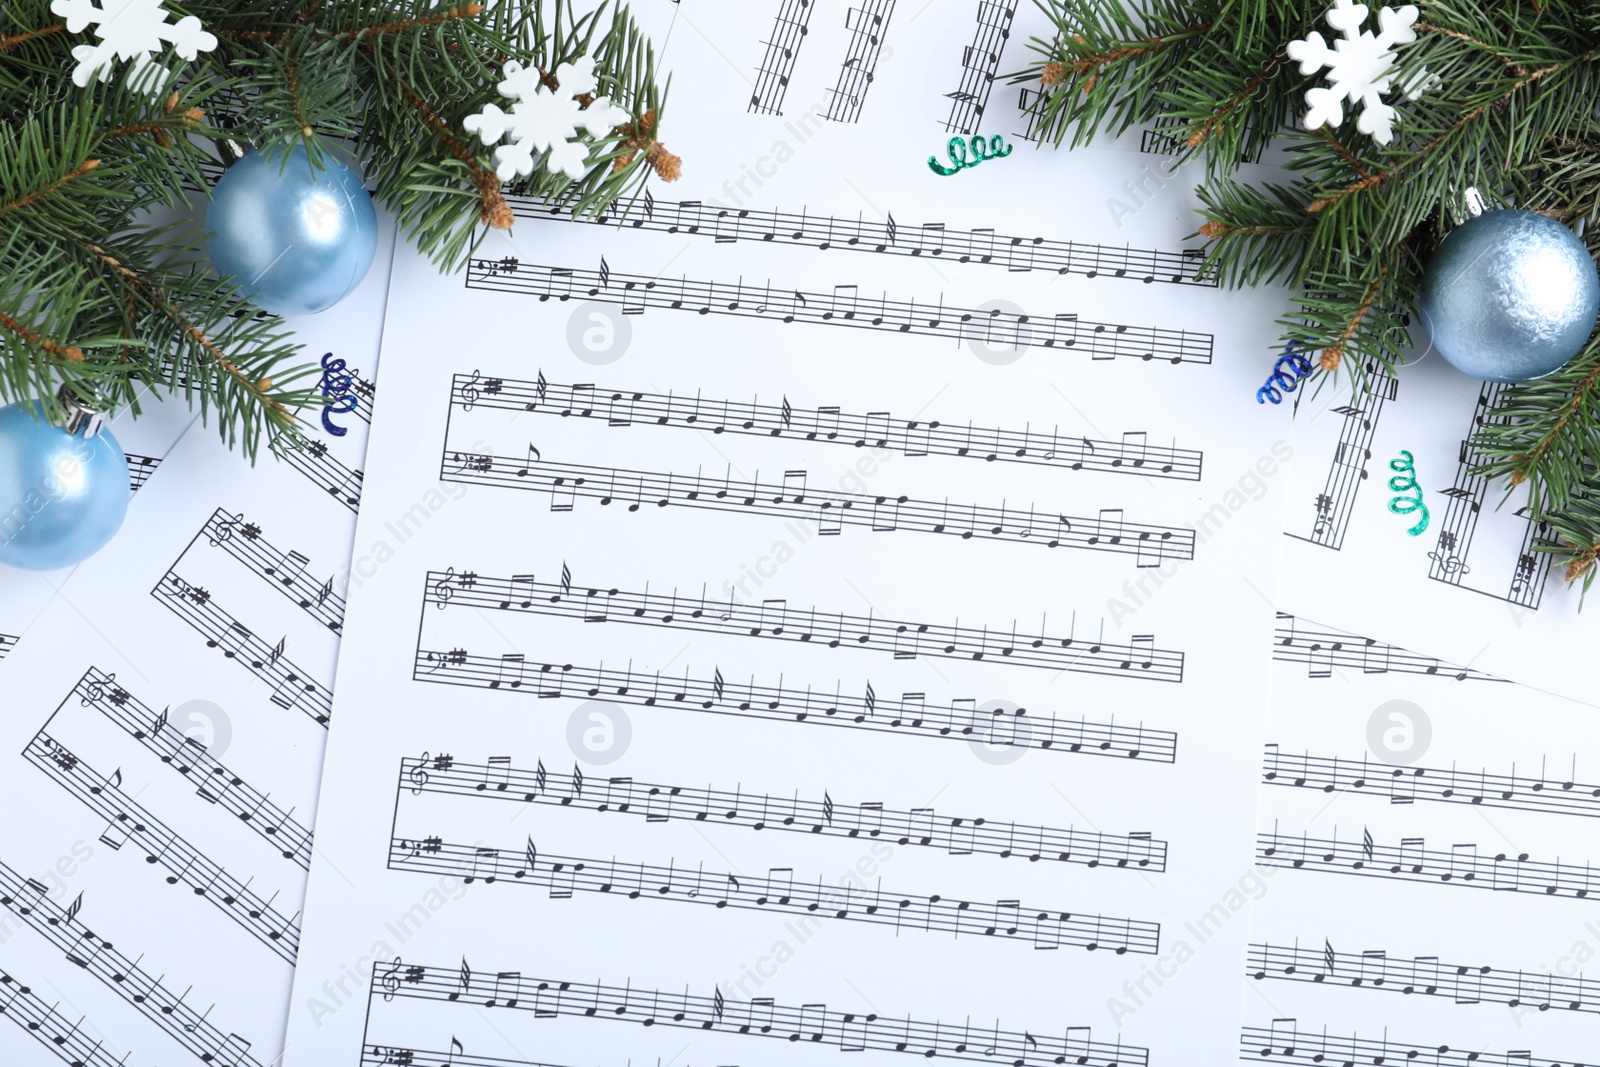 Photo of Fir branches, decorative snowflakes and light blue balls on Christmas music sheets, flat lay